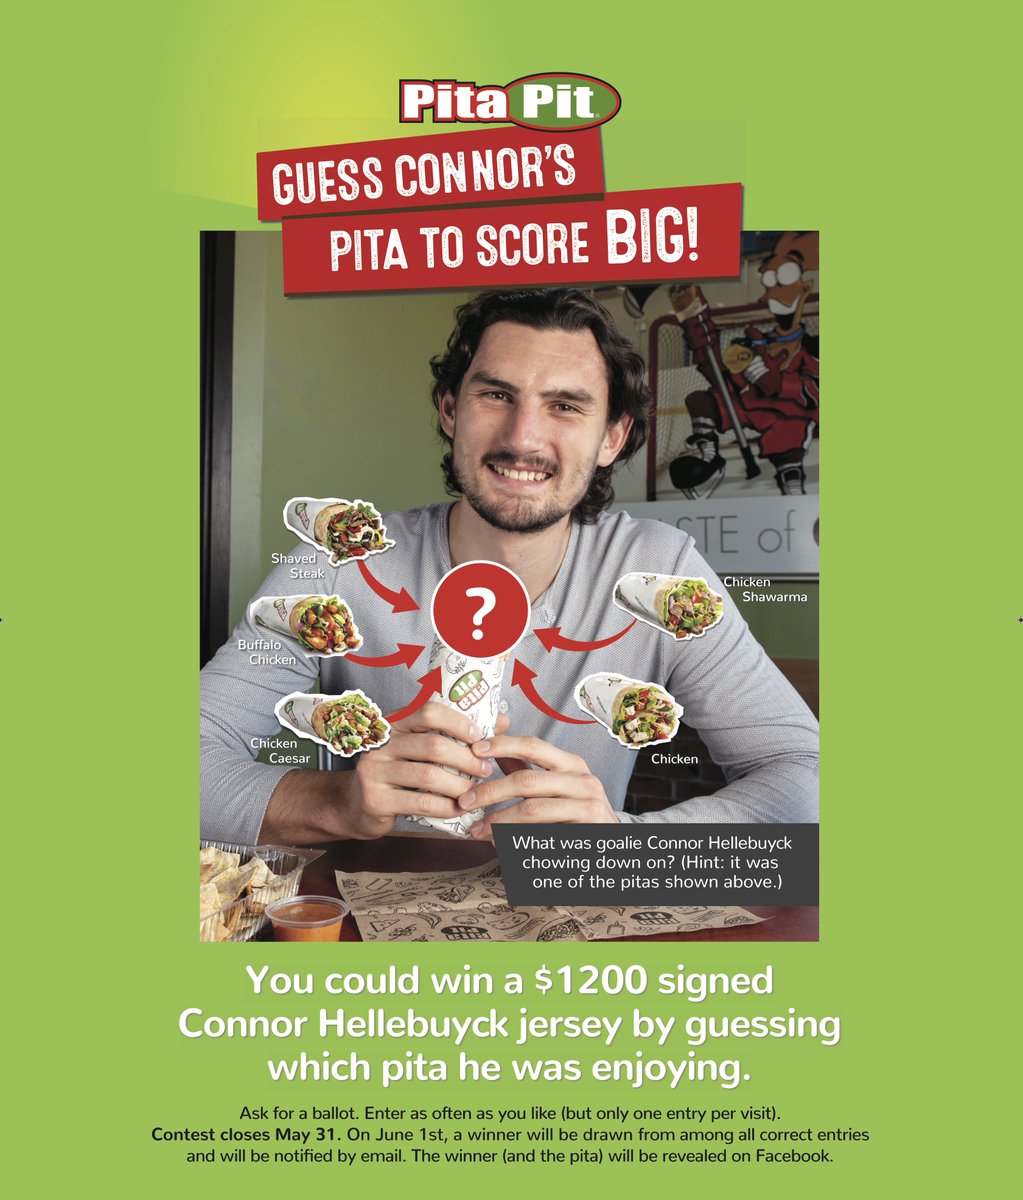 Connor Hellebuyck likes his pita toasted! Visit our Facebook page to learn how you could win a $1200 signed Connor Hellebuyck jersey by guessing which pita he is eating. *Contest closes Friday, May 31st. On June 1st the winner will be announced.